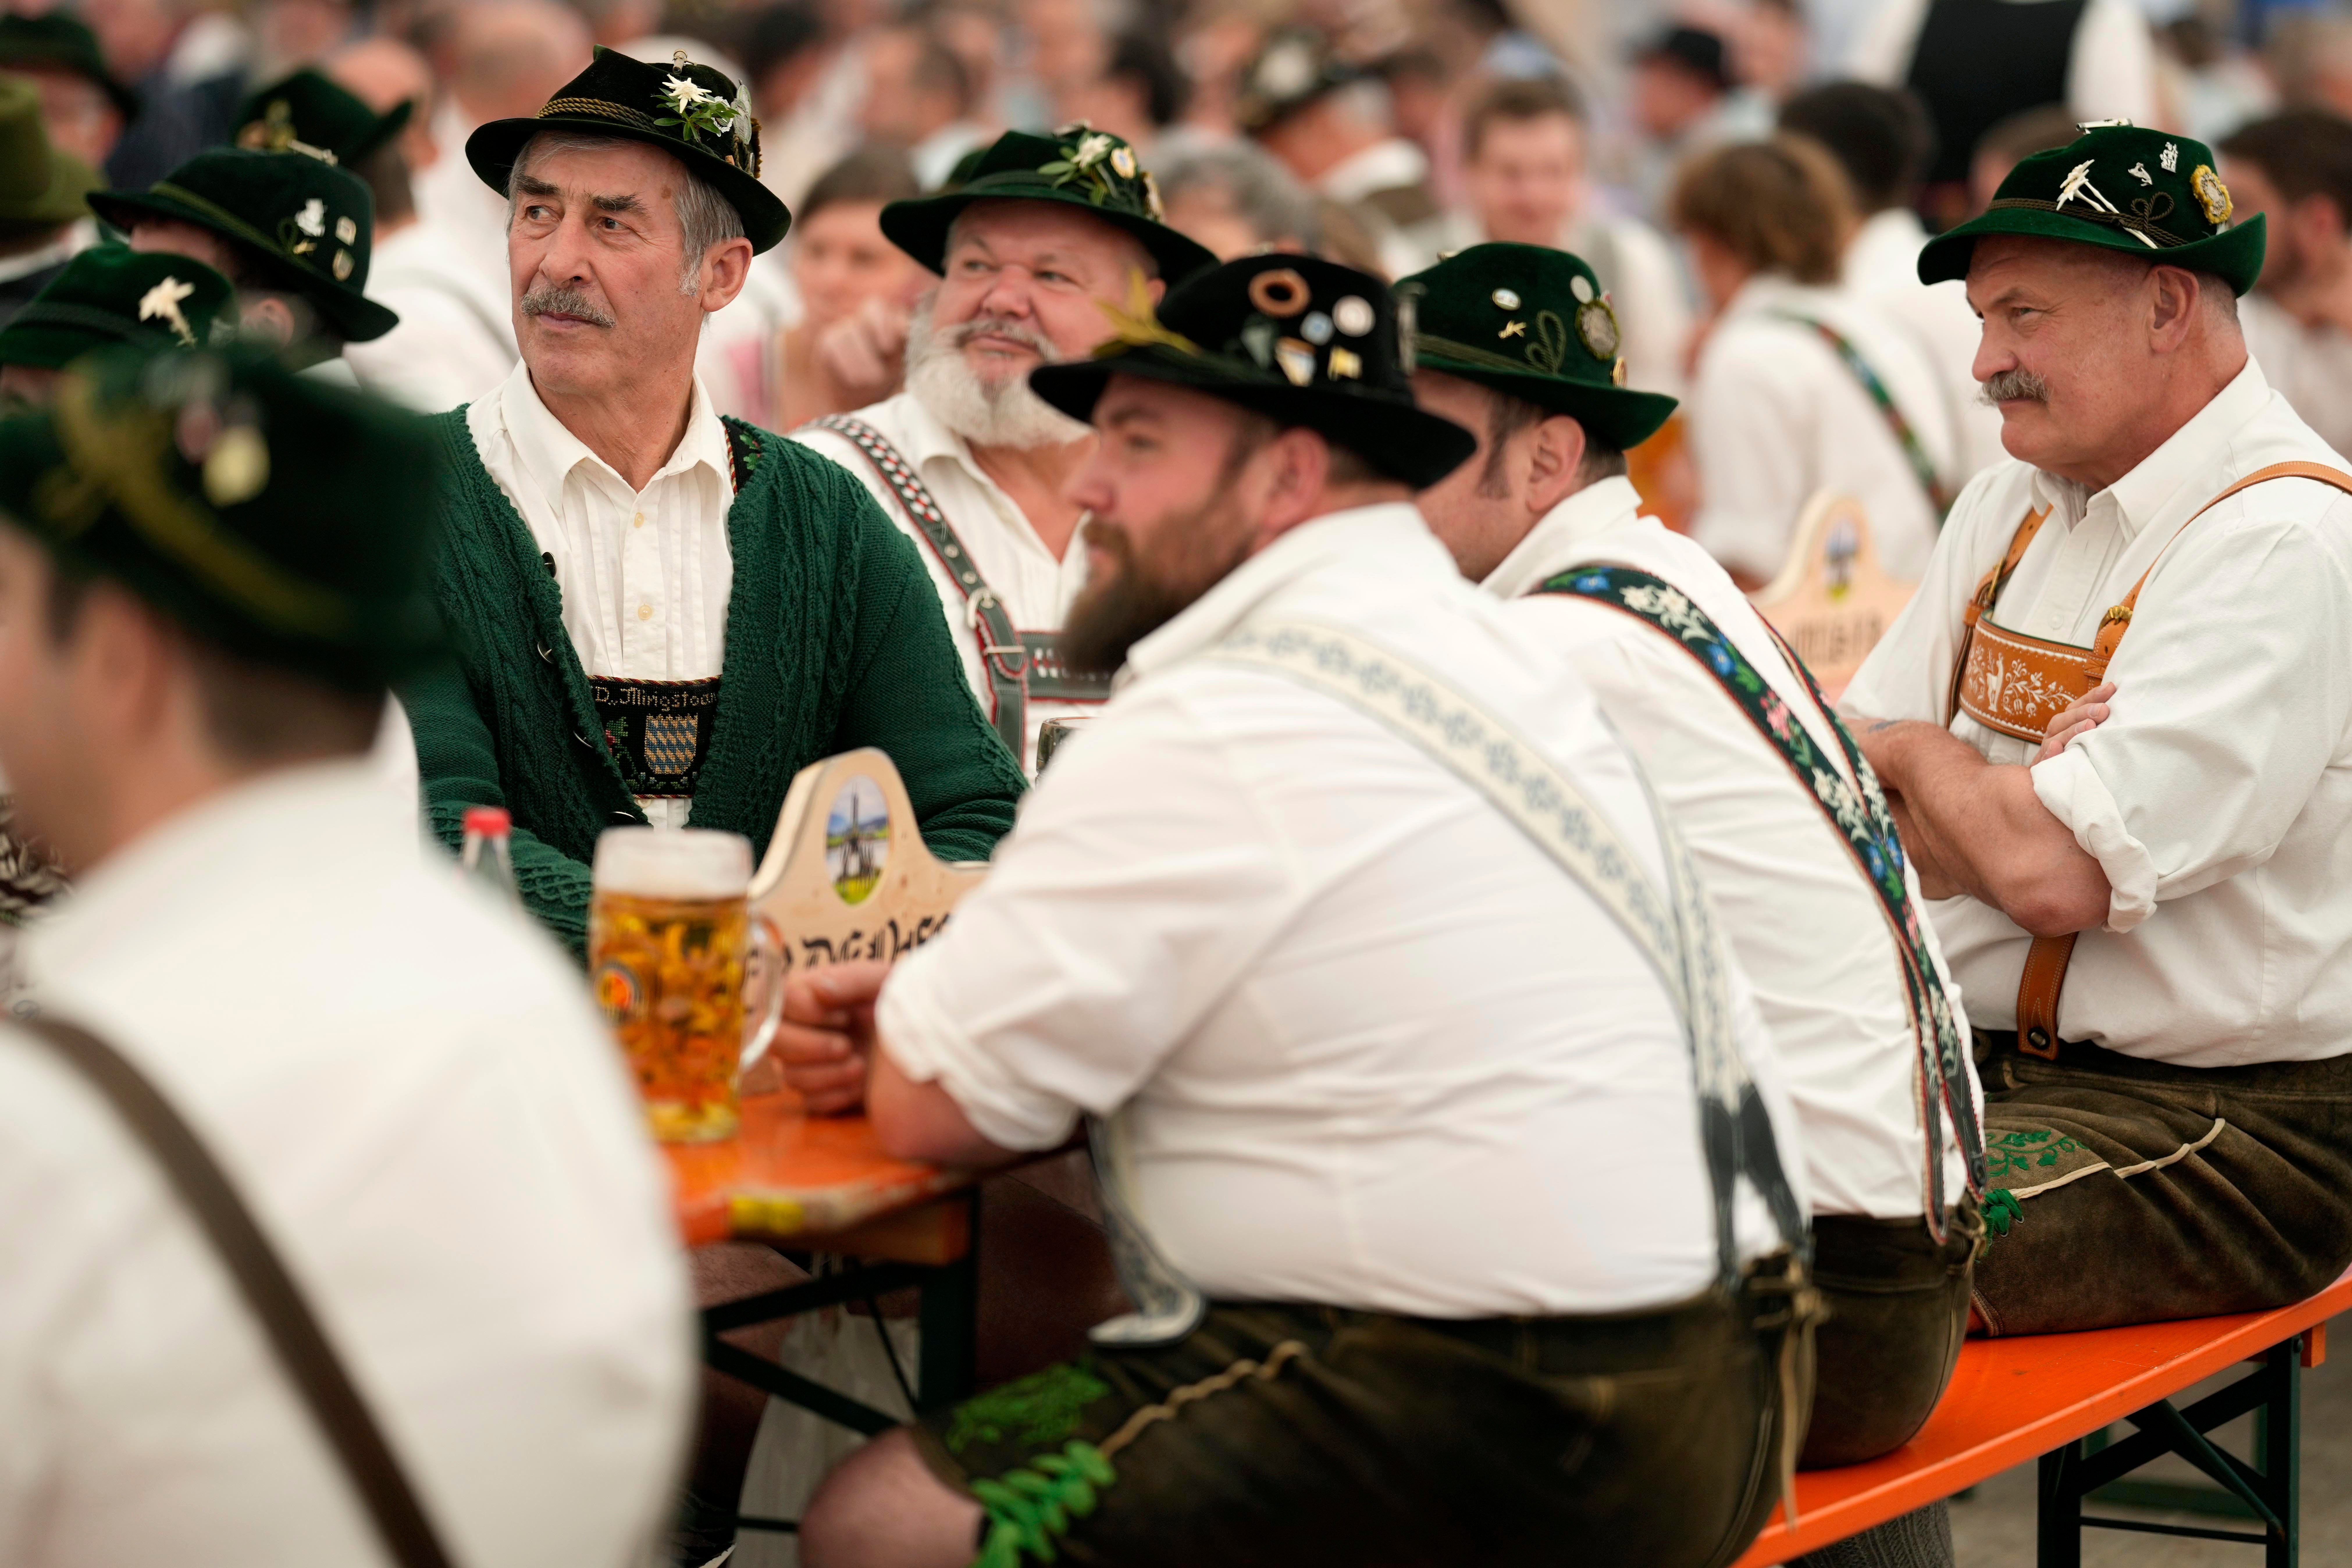 People dressed in traditional clothes attend the German Championships in Fingerhakeln or finger wrestling